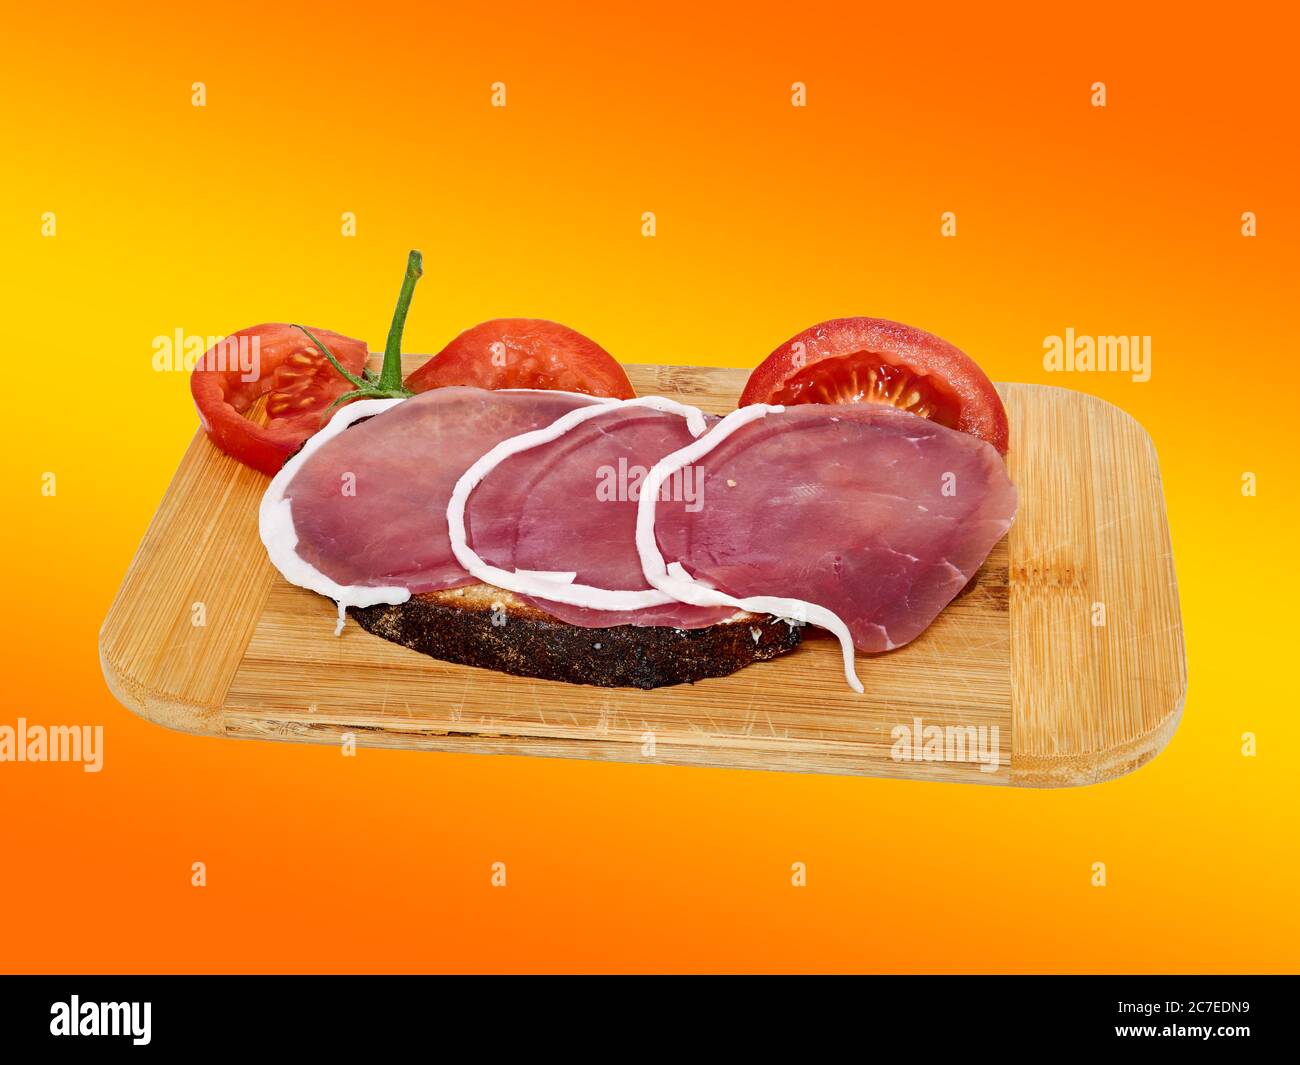 Ham bread on a wooden board, isolated against a orange background. Stock Photo